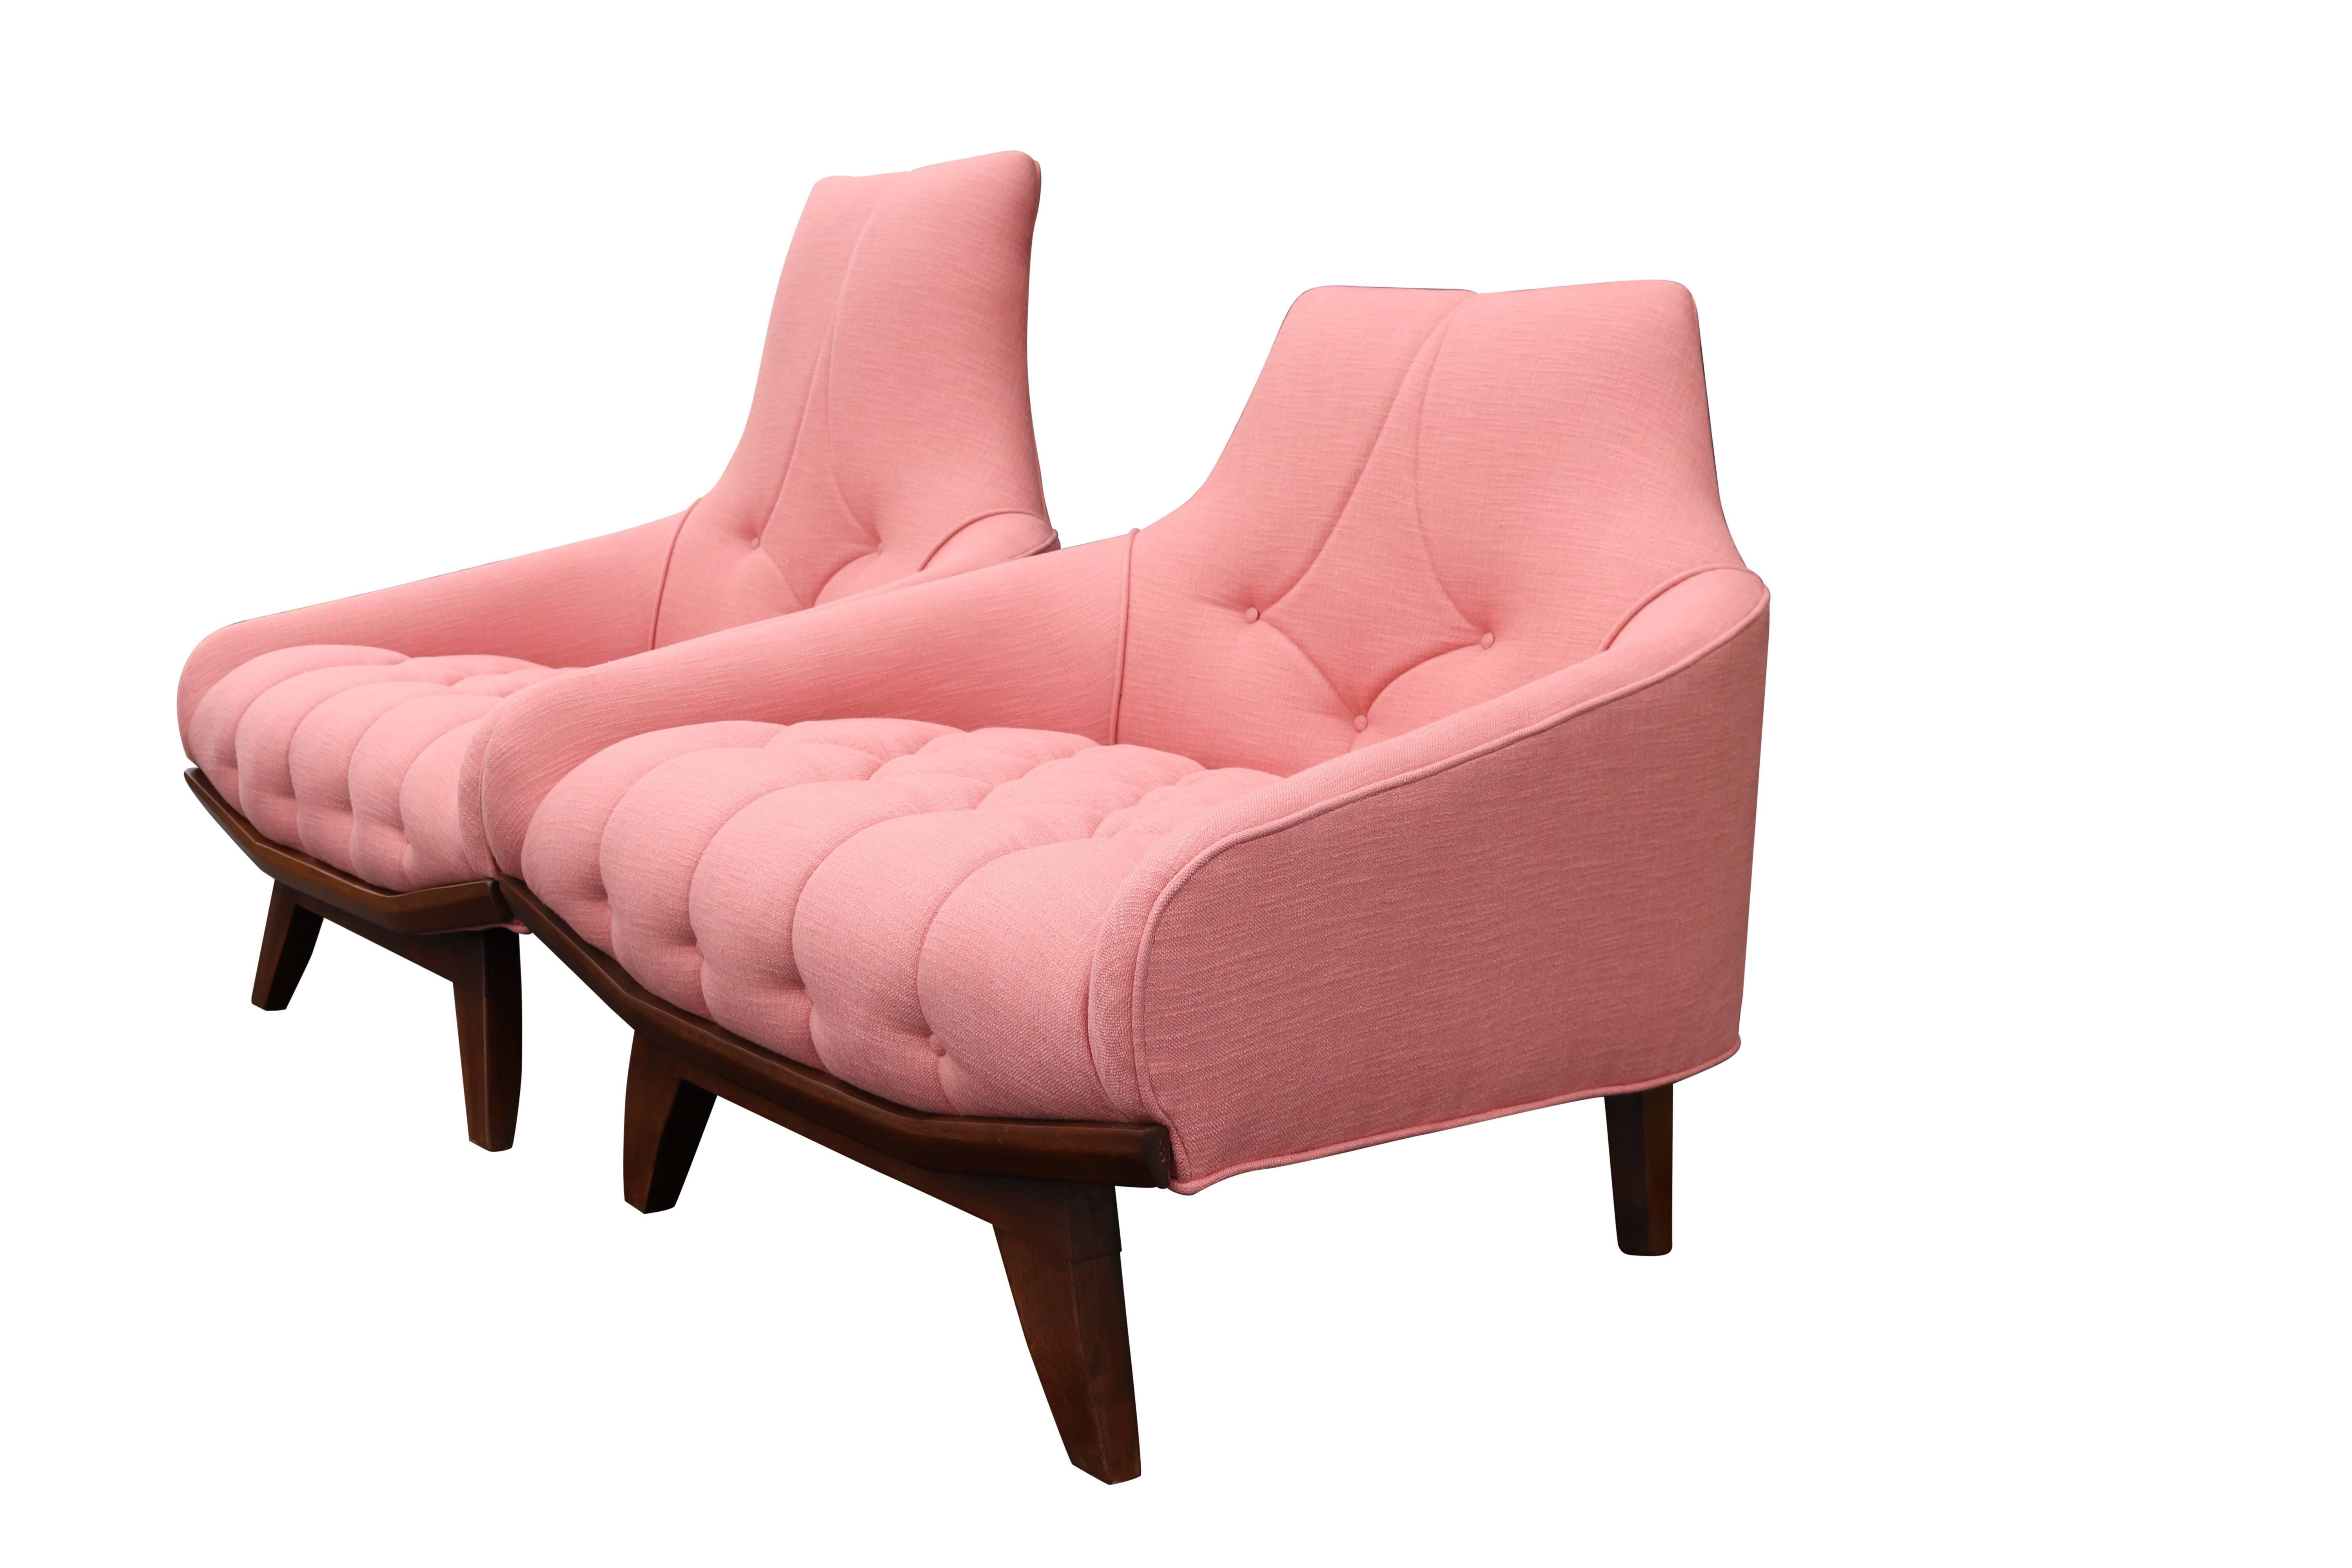 This lovely pair of Mid-Century Modern gondola chairs has been lovingly restored and covered in pink linen. Ample in size these would be a comfortable and fun addition to any decor. Smaller chair is 32 inches high, 36 wide, 32 deep with a 17.5 inch